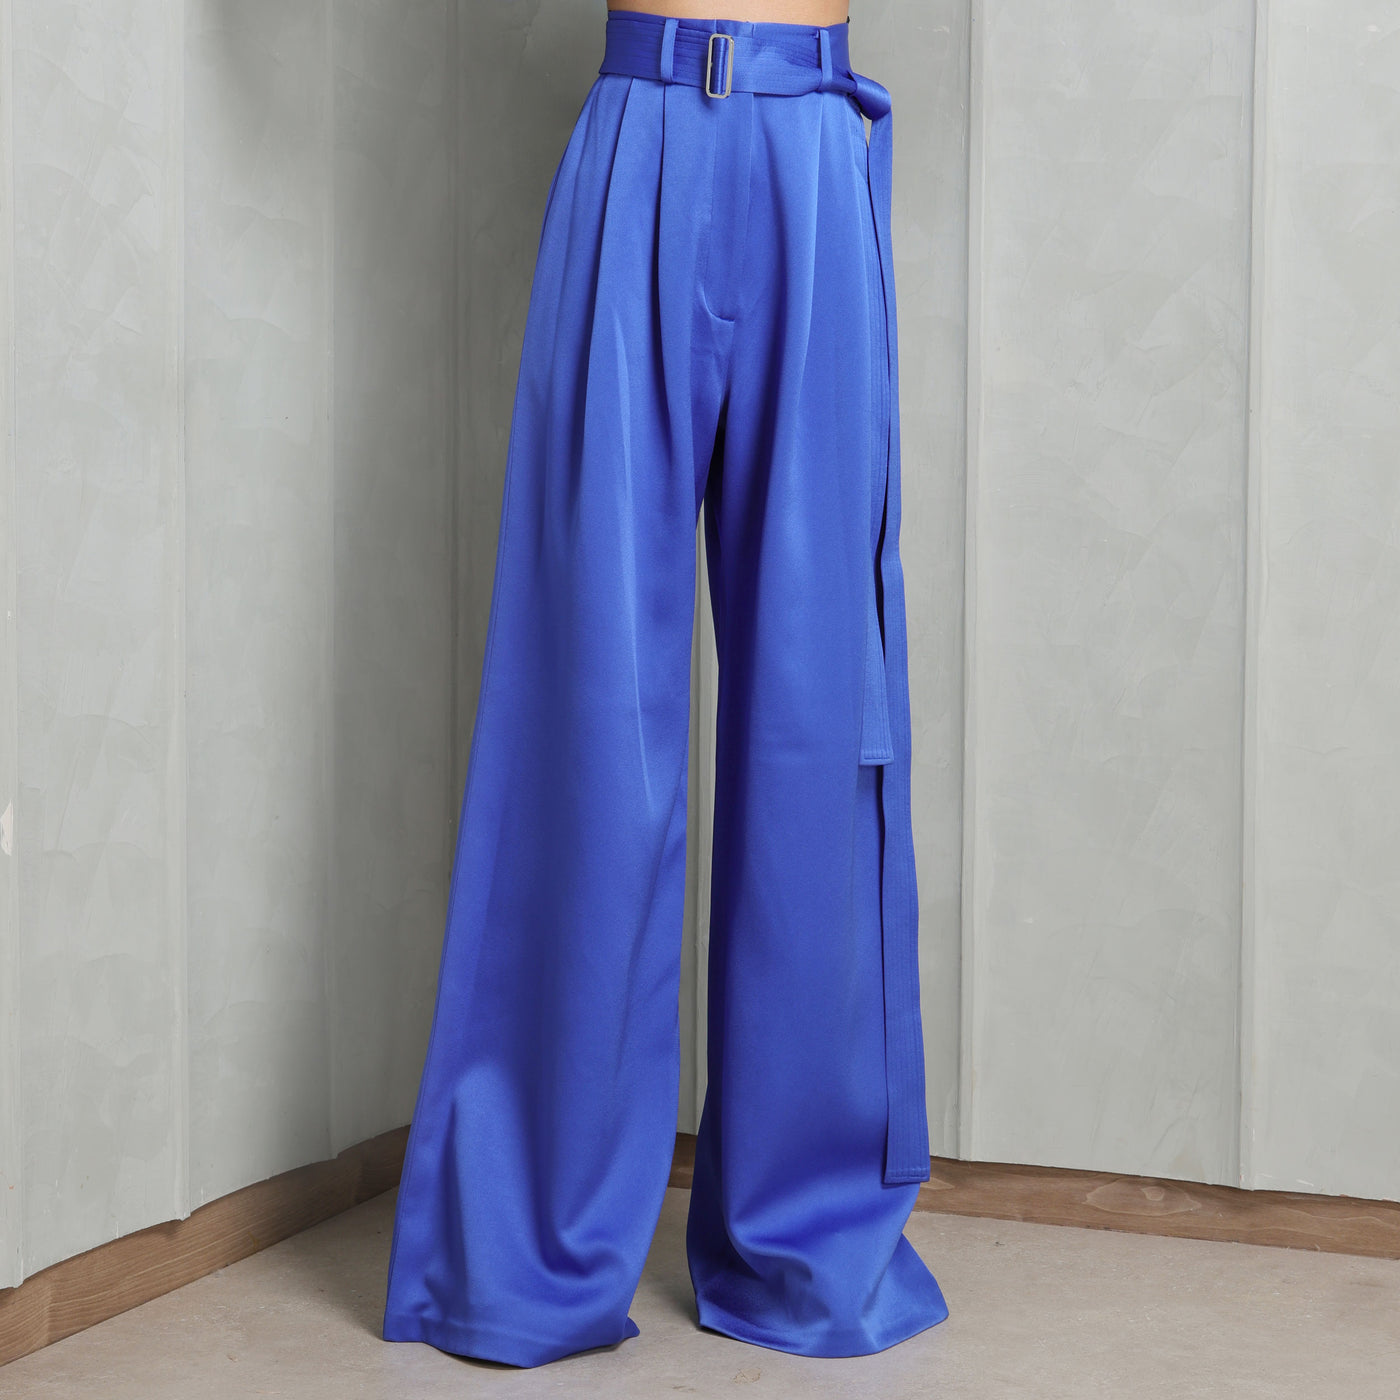 ALEX PERRY belted blue pants